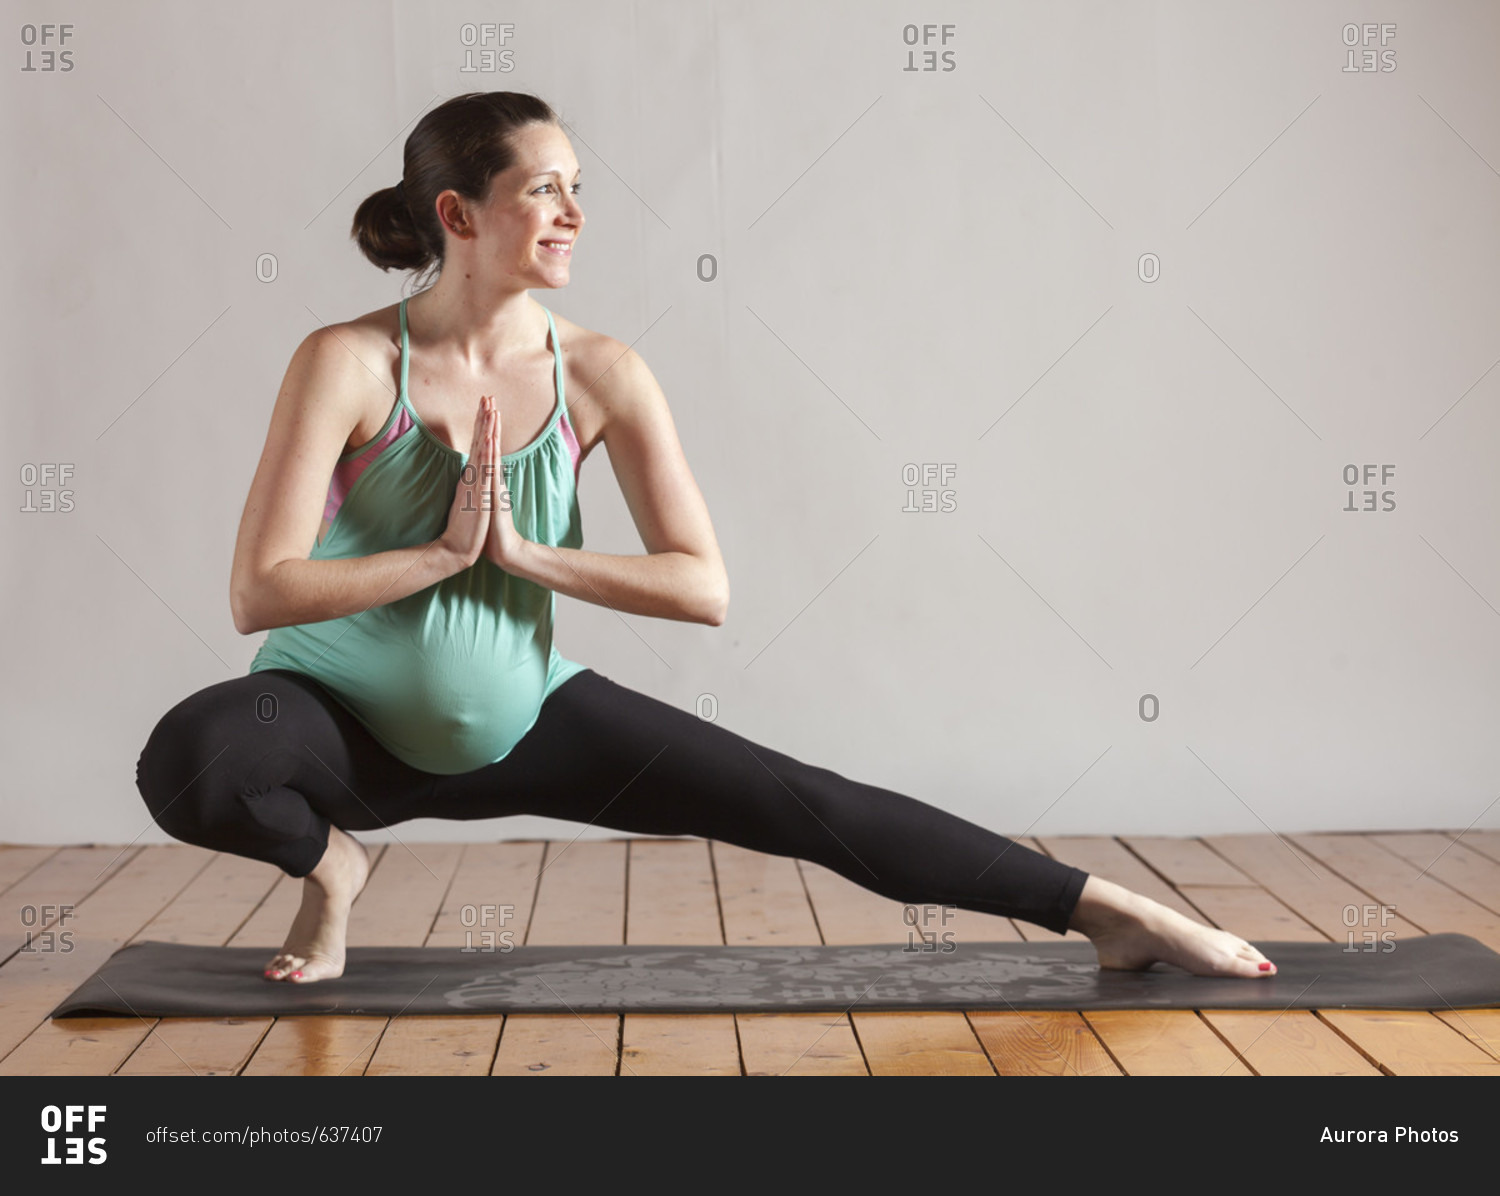 Pregnant women doing yoga pose side lunge and stretching with hands in prayer, Boston, Massachusetts, USA